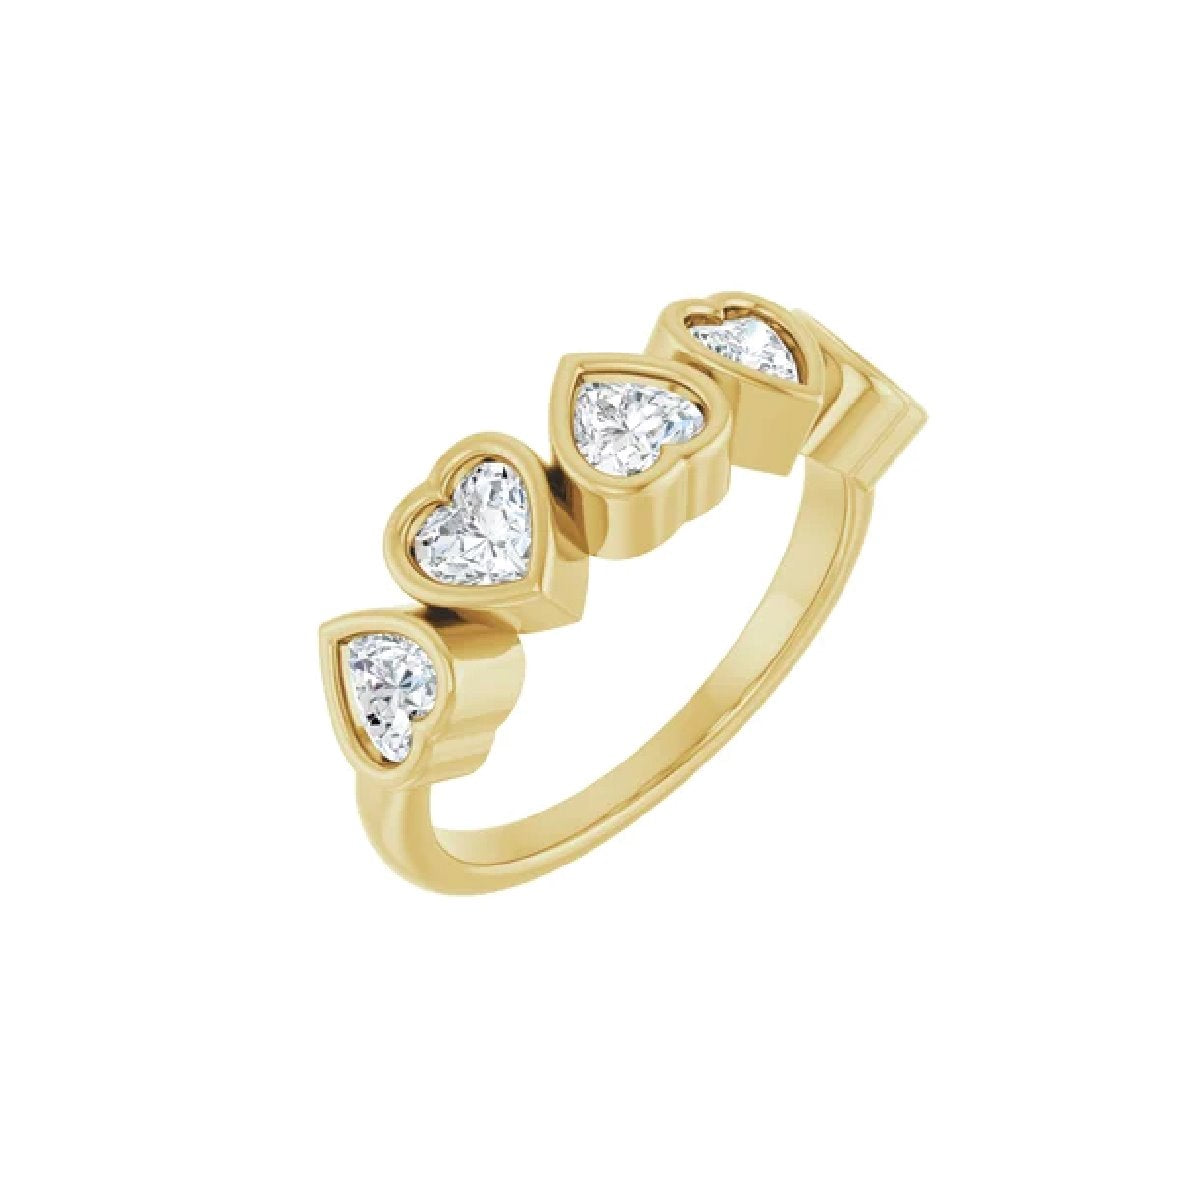 Gemstone Heart Ring Ring Robyn Canady 6 White Sapphire 14K Gold